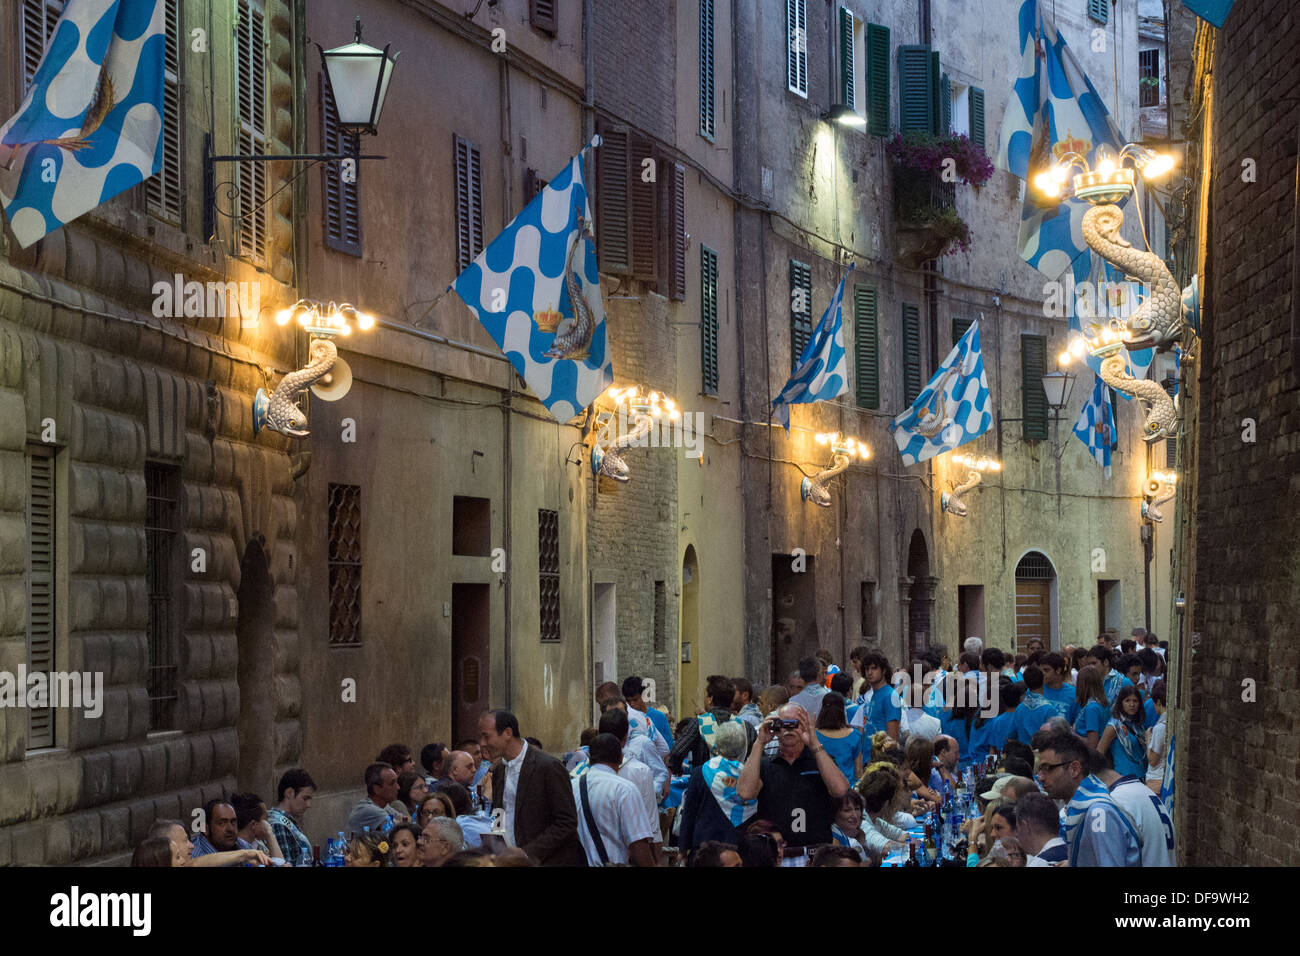 'Onda' (Wave) contrada (district) meal after the general Palio trial, the evening before the Palio itself, Siena, Tuscany, Italy Stock Photo